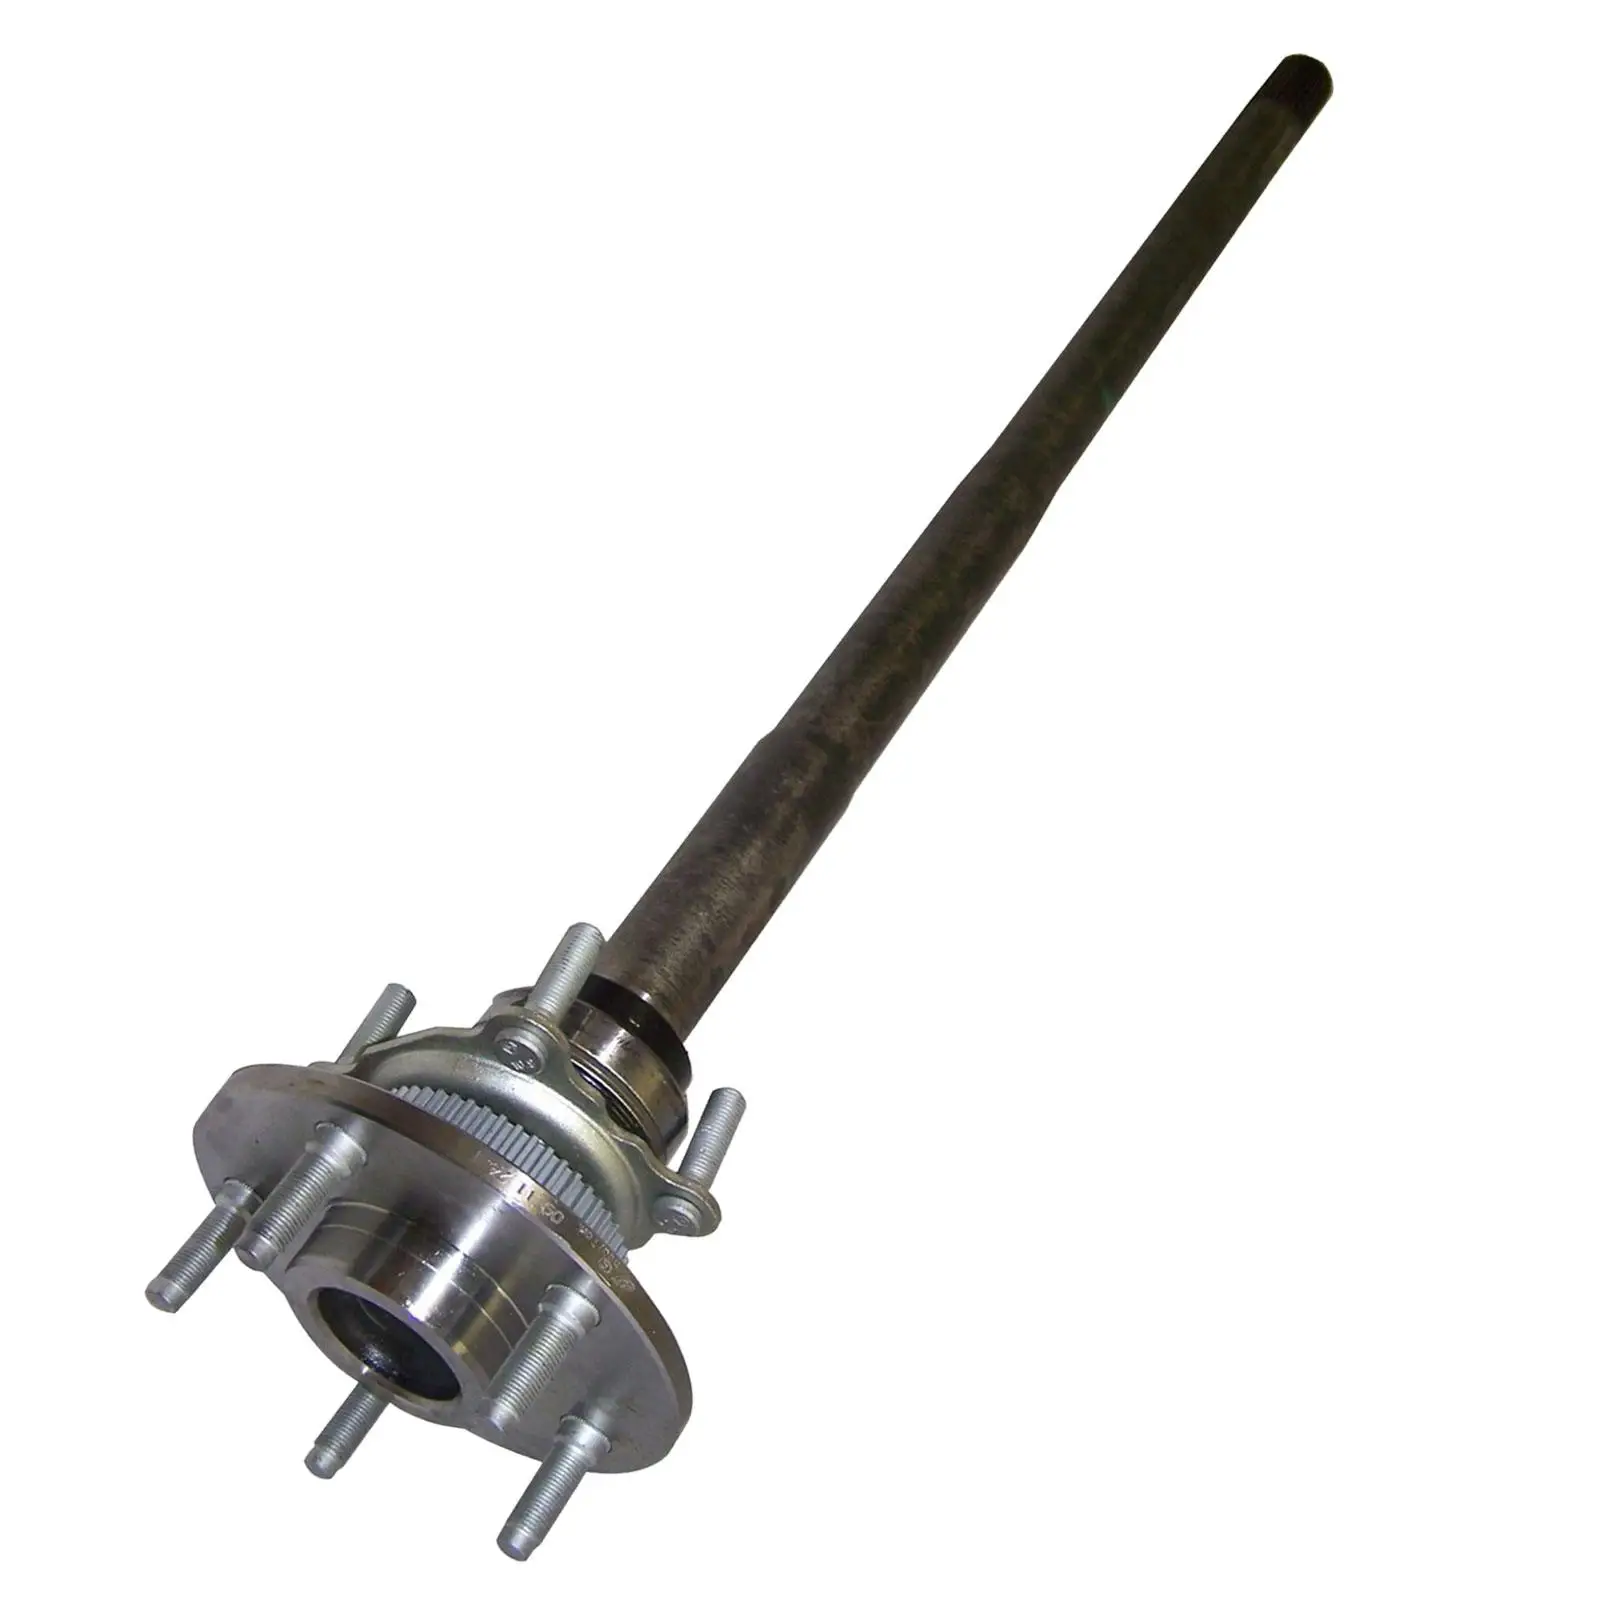 Axle Shaft Assembly 68003272AA Replacement Repair Parts for Jeep Wrangler JK Easily to Install Professional Car Accessories